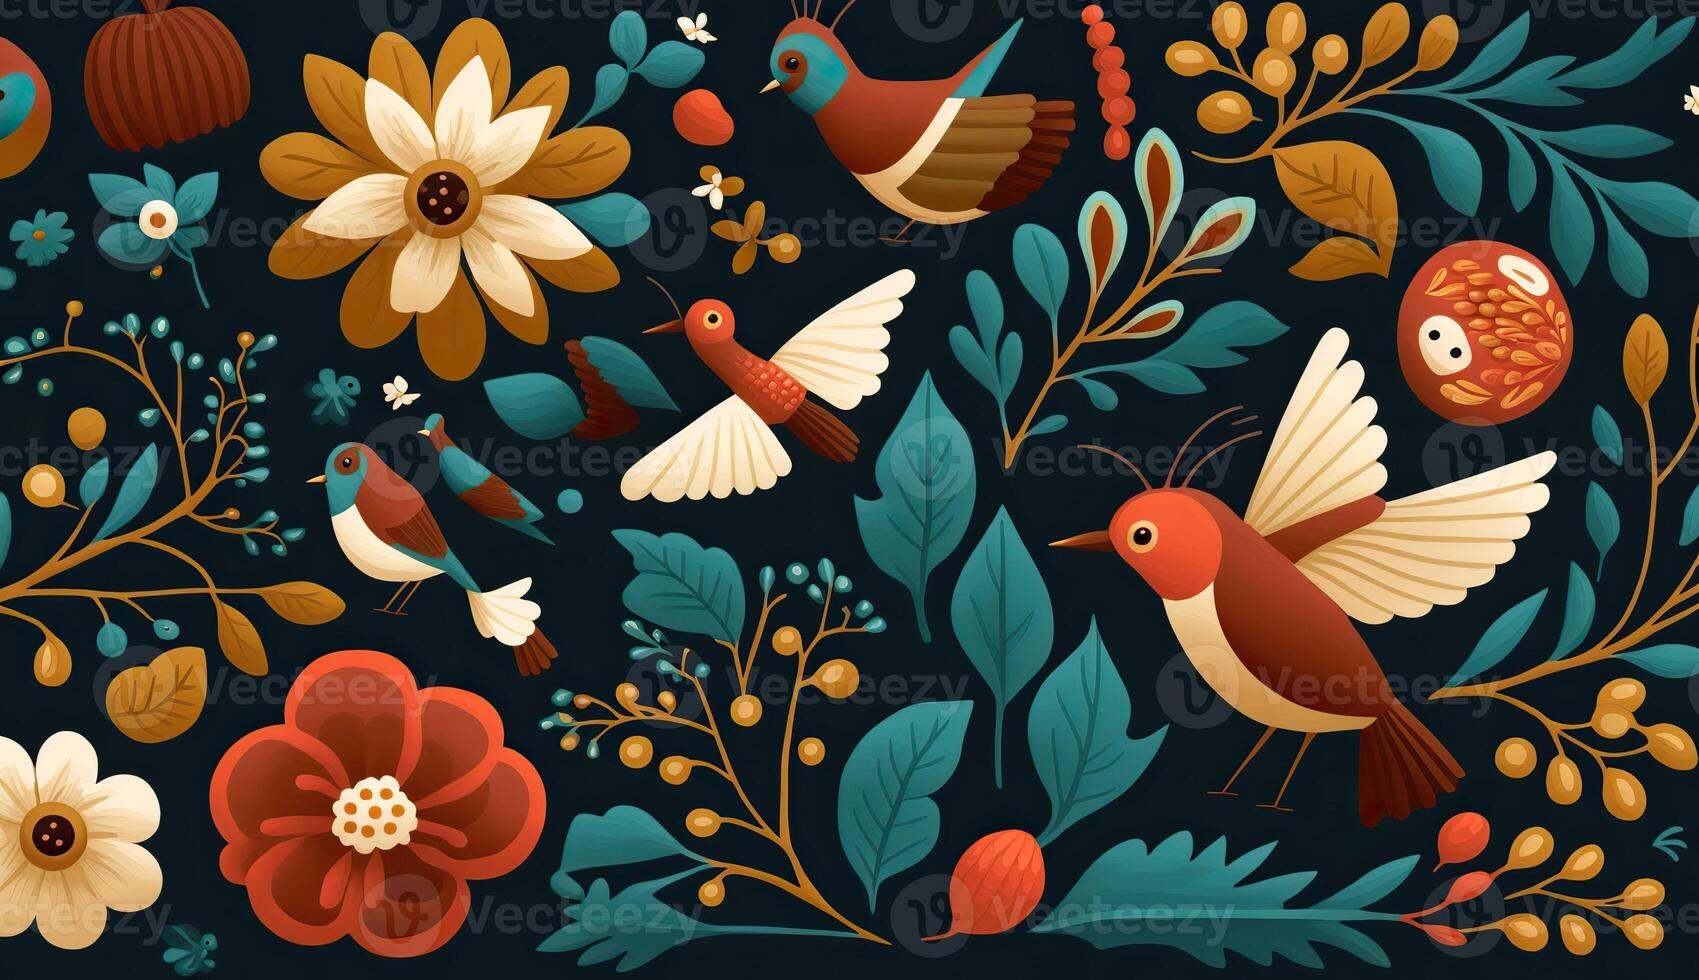 . . Abstract botanic floral flowers abstract pattern with birds. Graphic Art photo